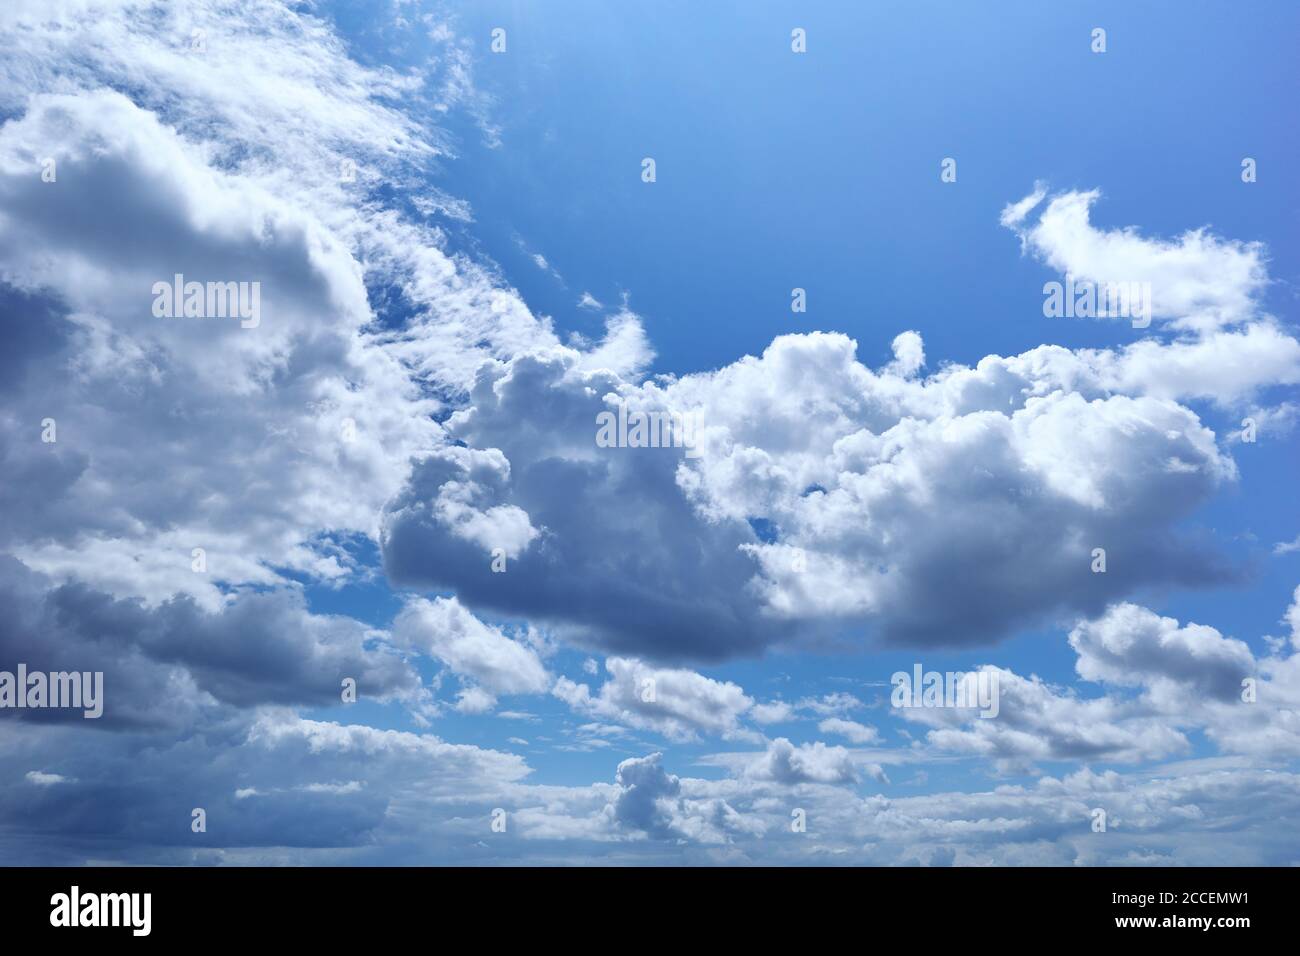 Blue heaven with fluffy cumulus clouds that look like pieces of floating cotton. Background for forecast and meteorology illustration Stock Photo